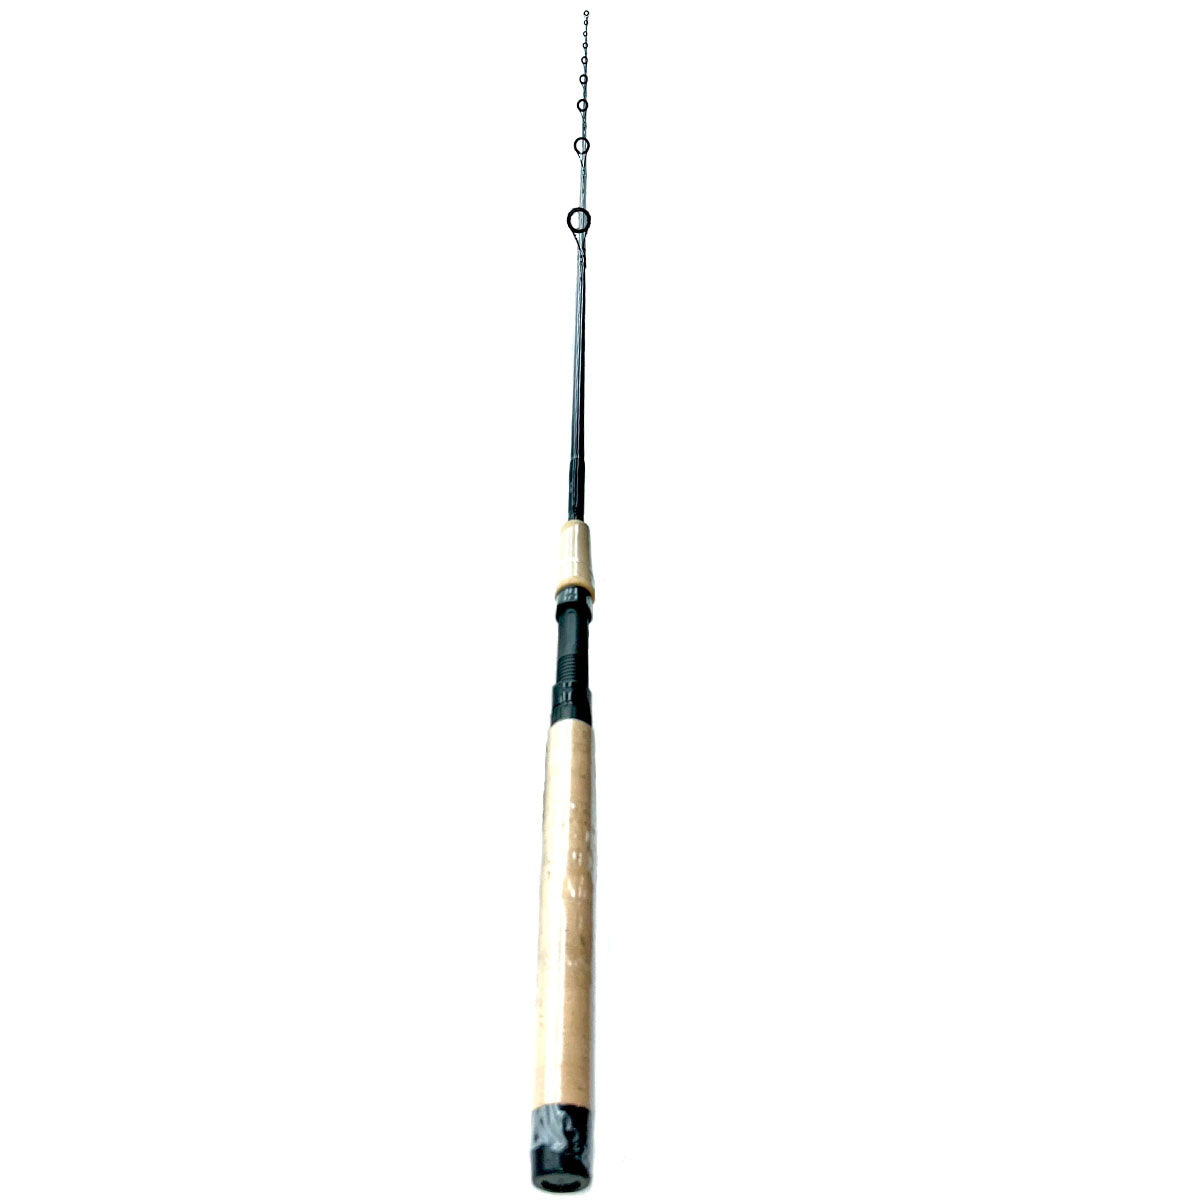 fishing rod carbon 150, fishing rod carbon 150 Suppliers and Manufacturers  at